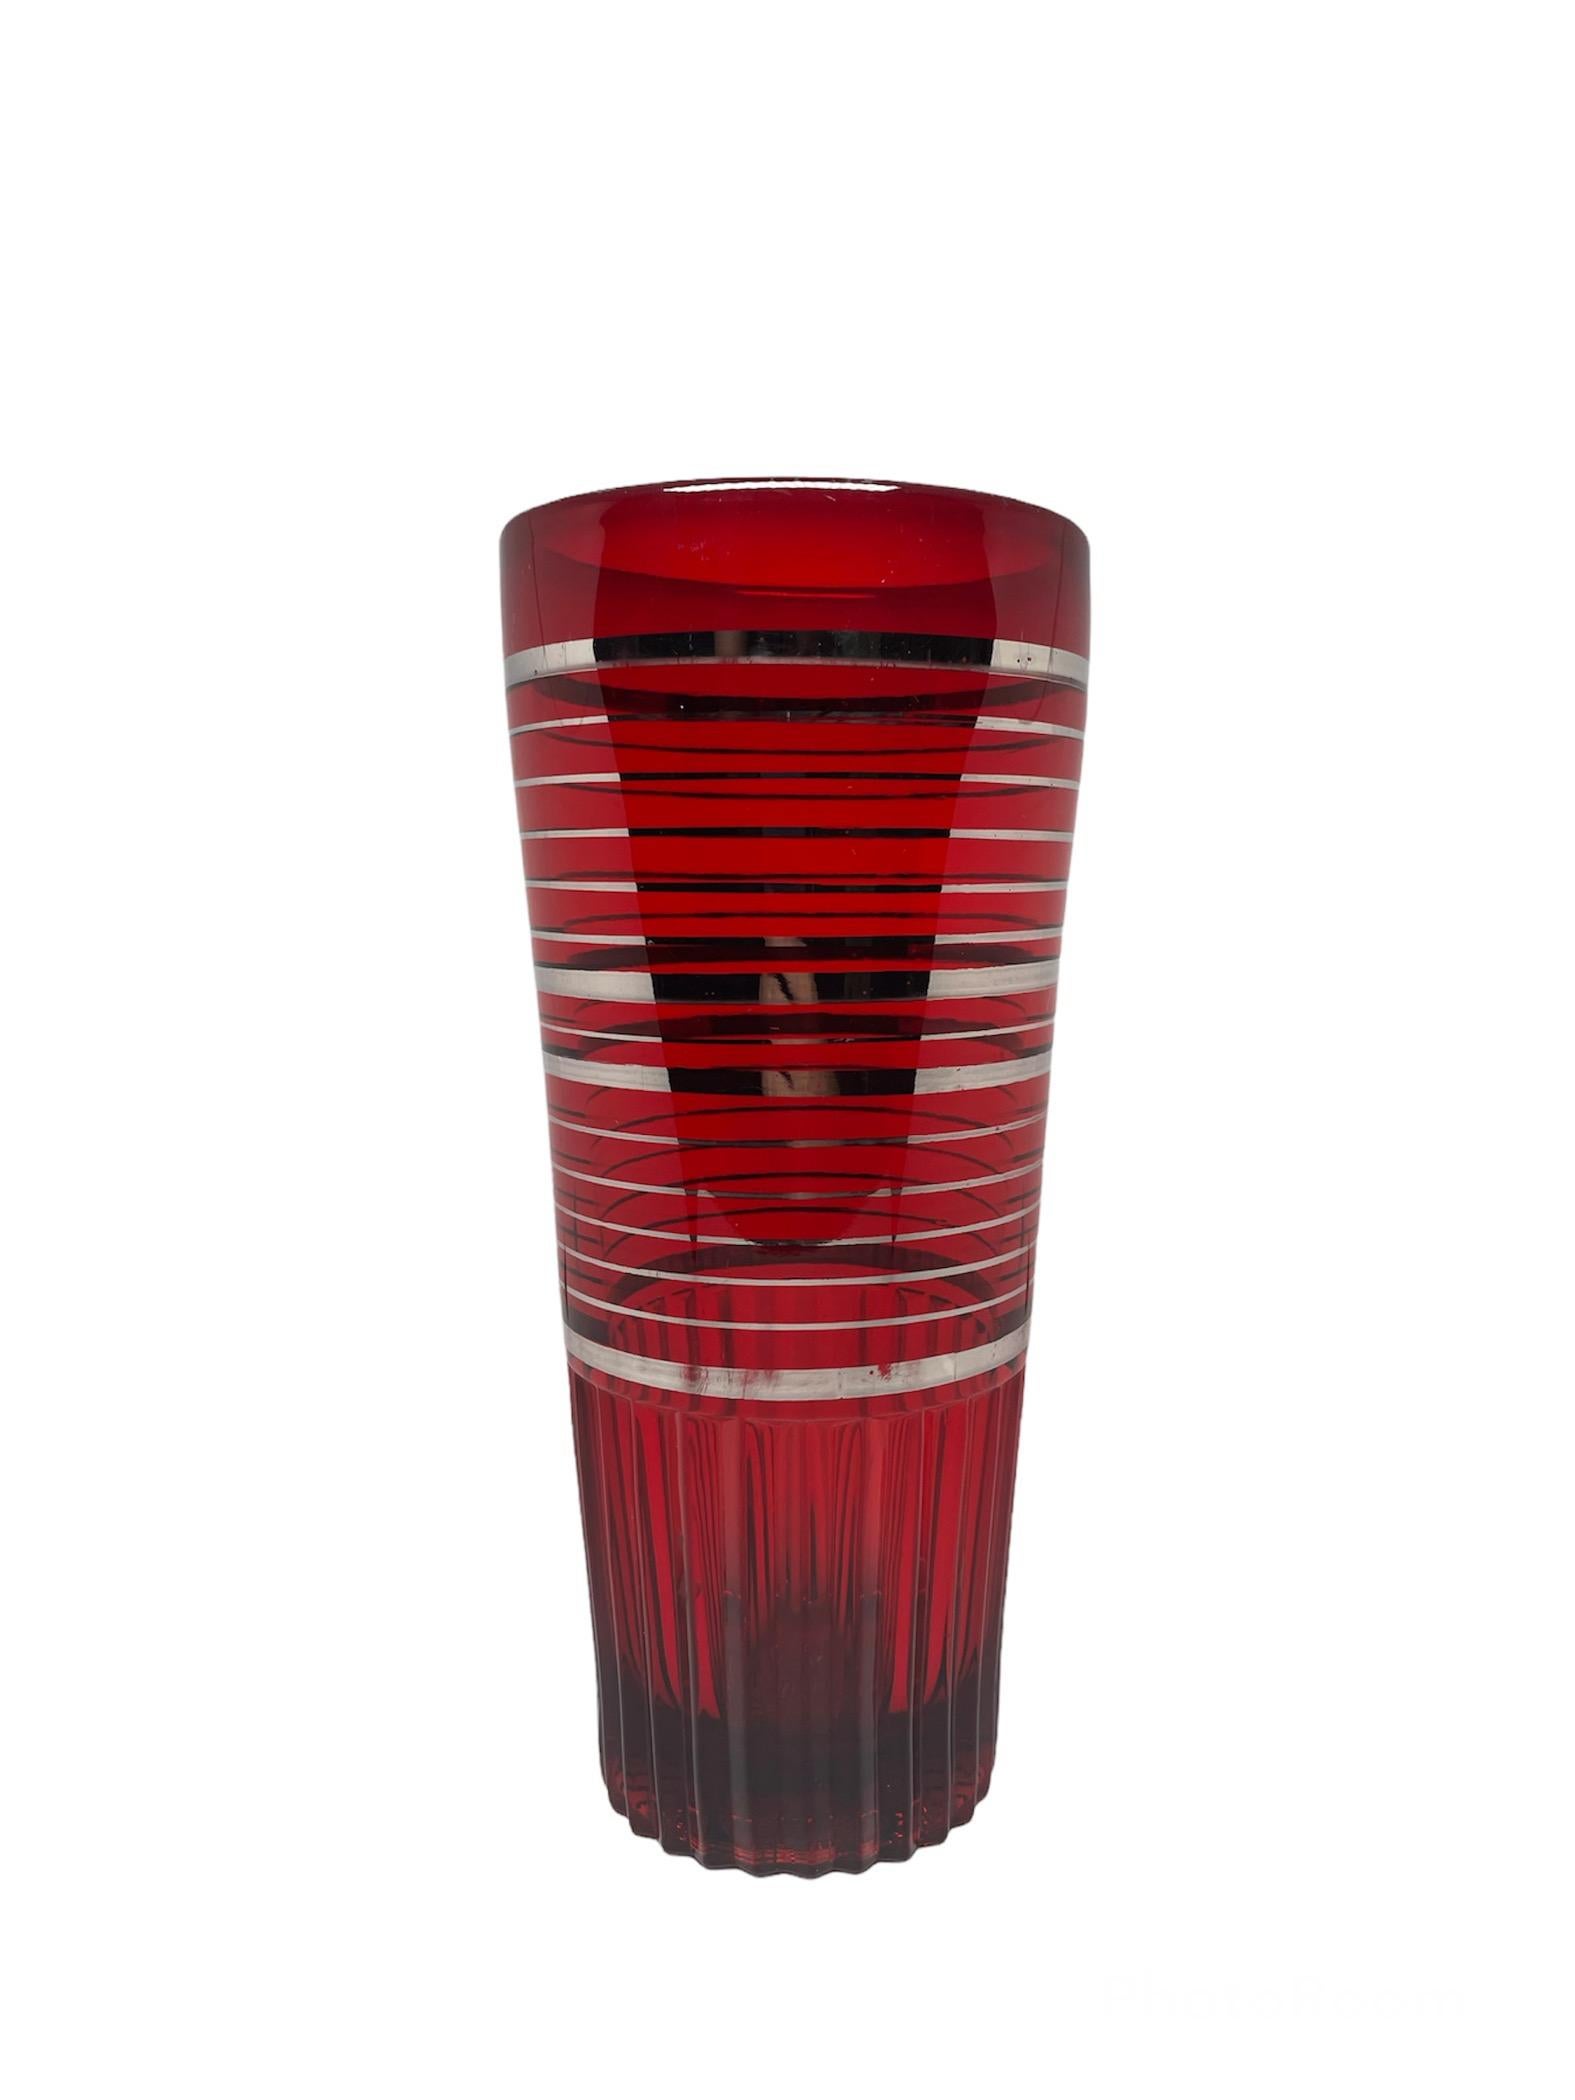 Molded Set of Paden City Ruby Red Glass Cocktail Shaker and Glasses For Sale